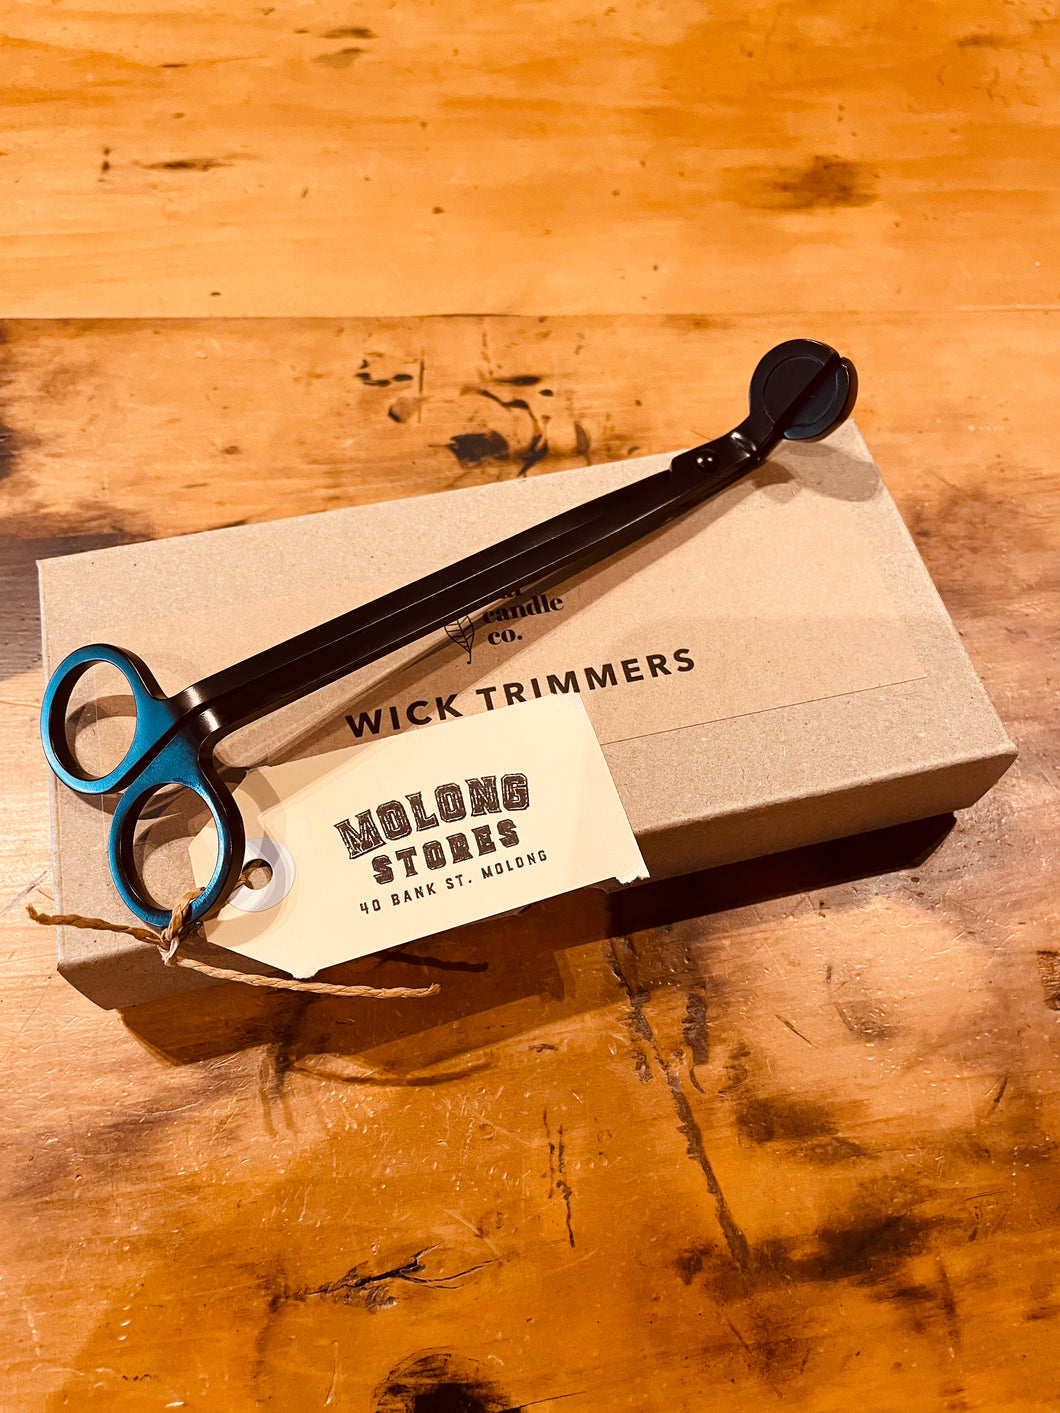 Whicker Trimmer